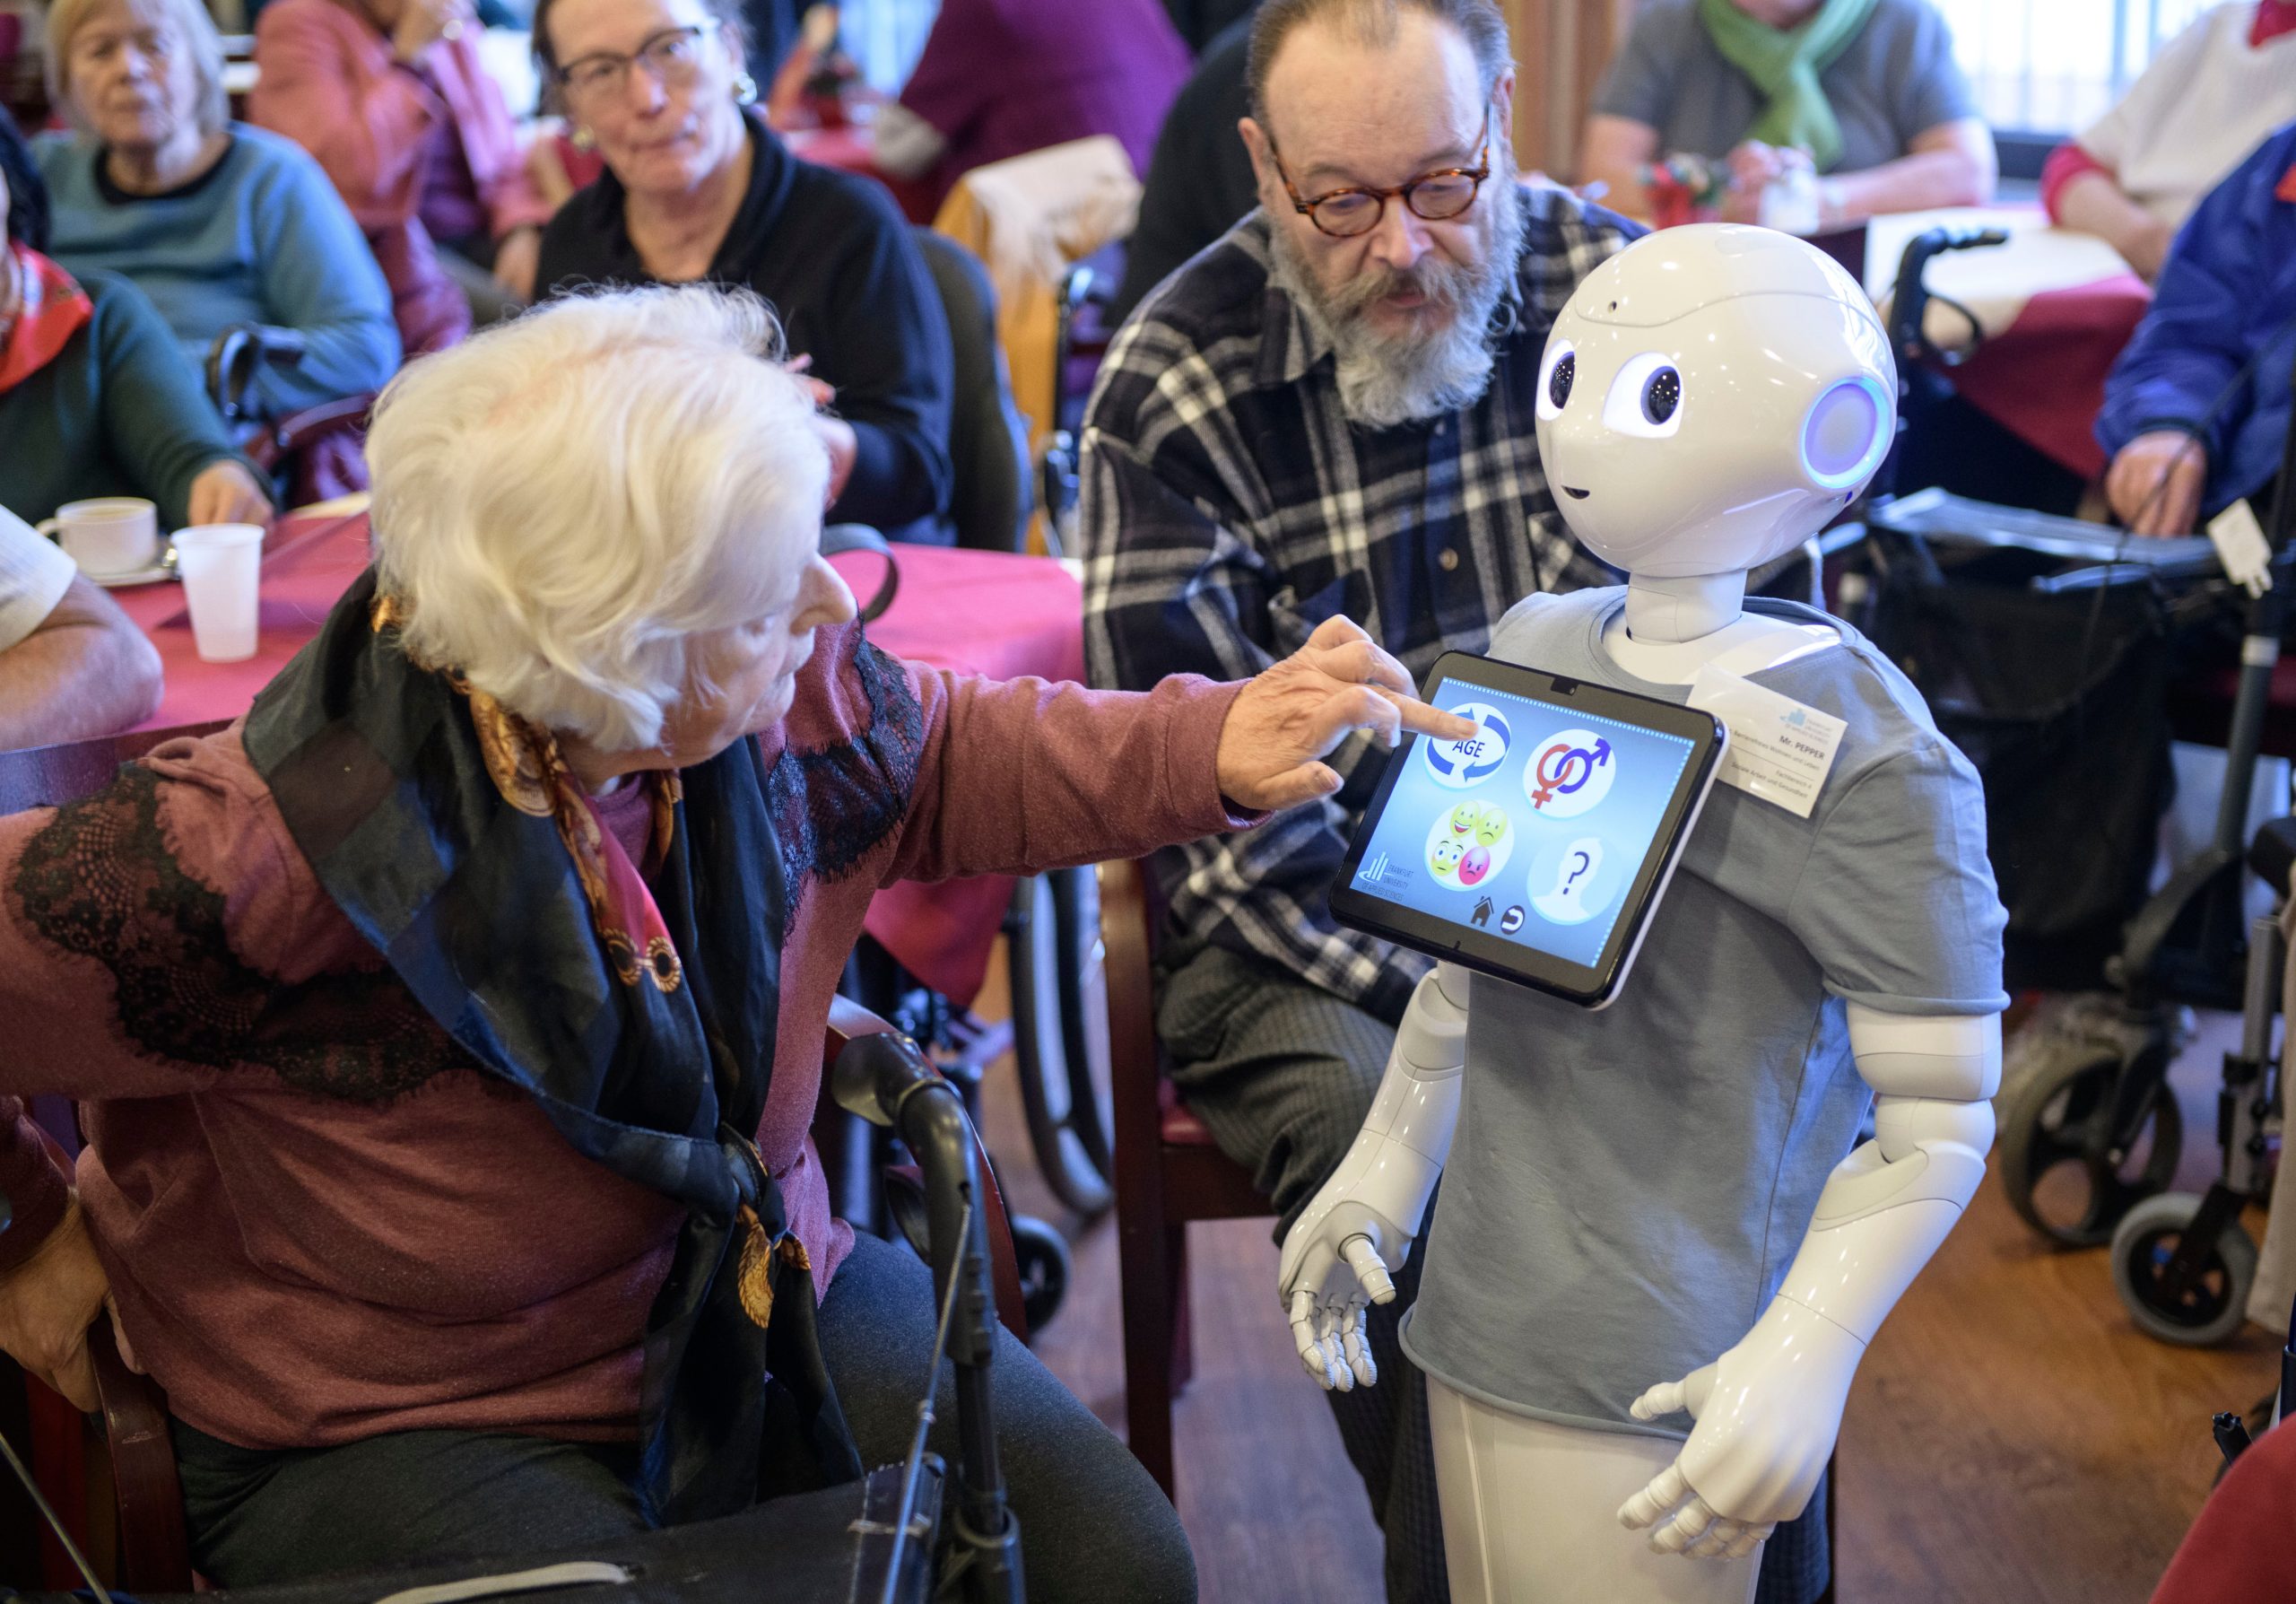 An elderly resident looks to Pepper during a presentation of two robots at the August-Stunz-Altenzentrum senior care facility on November 28, 2018 in Frankfurt, Germany.  (Photo: Thomas Lohnes, Getty Images)